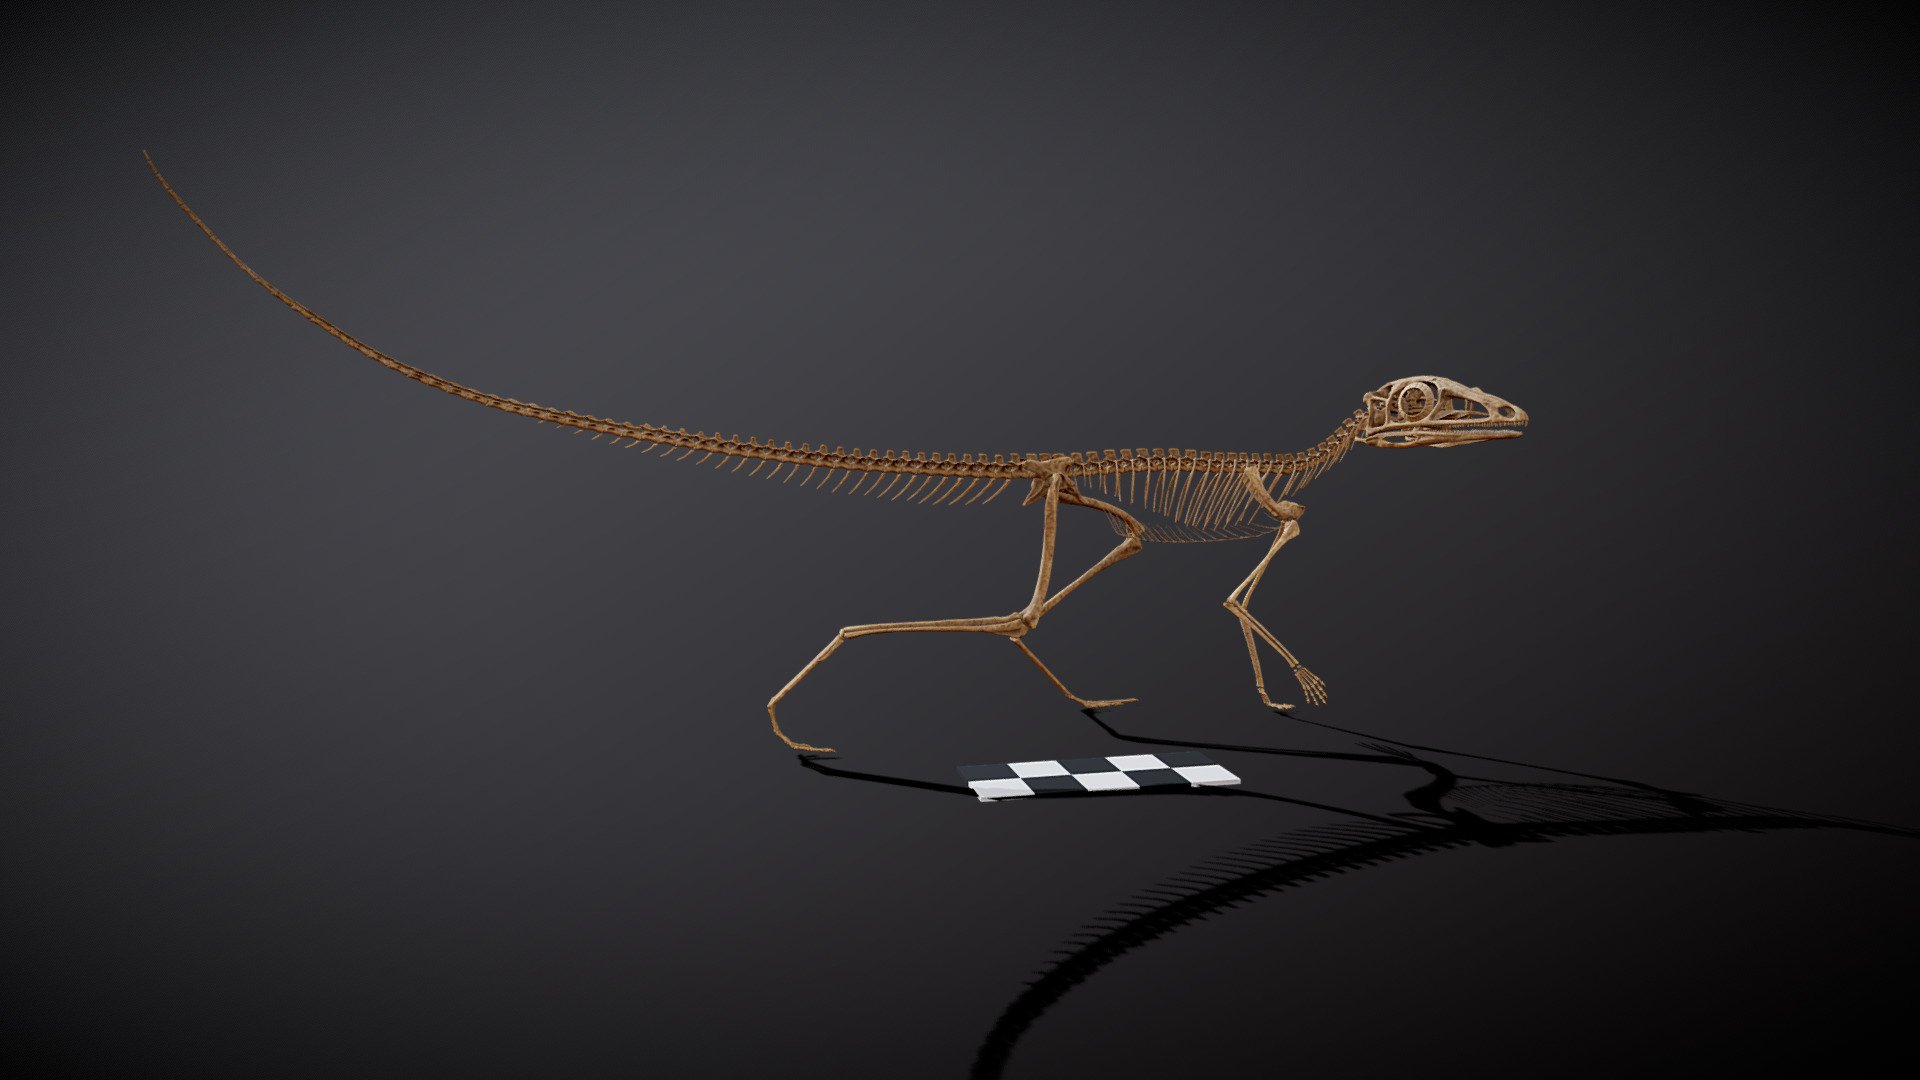 A digital reconstruction of the Late Triassic archosauriform Scleromochlus taylori. Modelled, sculpted, textured, and rendered in blender 2.92, using CT-scan data of NHMUK_PV_R3146, R3556, R3557, R3914, R4823, and R5589. The specimens this reconstruction is based on are in the collections of the Natural History Museum, London.

As featured in: Scleromochlus and the early evolution of Pterosauromorpha, Nature, Davide Foffa, Emma M. Dunne, Sterling J. Nesbitt, Richard J. Butler, Nicholas C. Fraser, Stephen L. Brusatte, Alexander Farnsworth, Daniel J. Lunt, Paul J. Valdes, Stig Walsh, Paul M. Barrett. 

DOI 10.1038/s41586-022-05284-x - Scleromochlus taylori - 3D model by Matt Humpage (@MattHumpage) 3d model